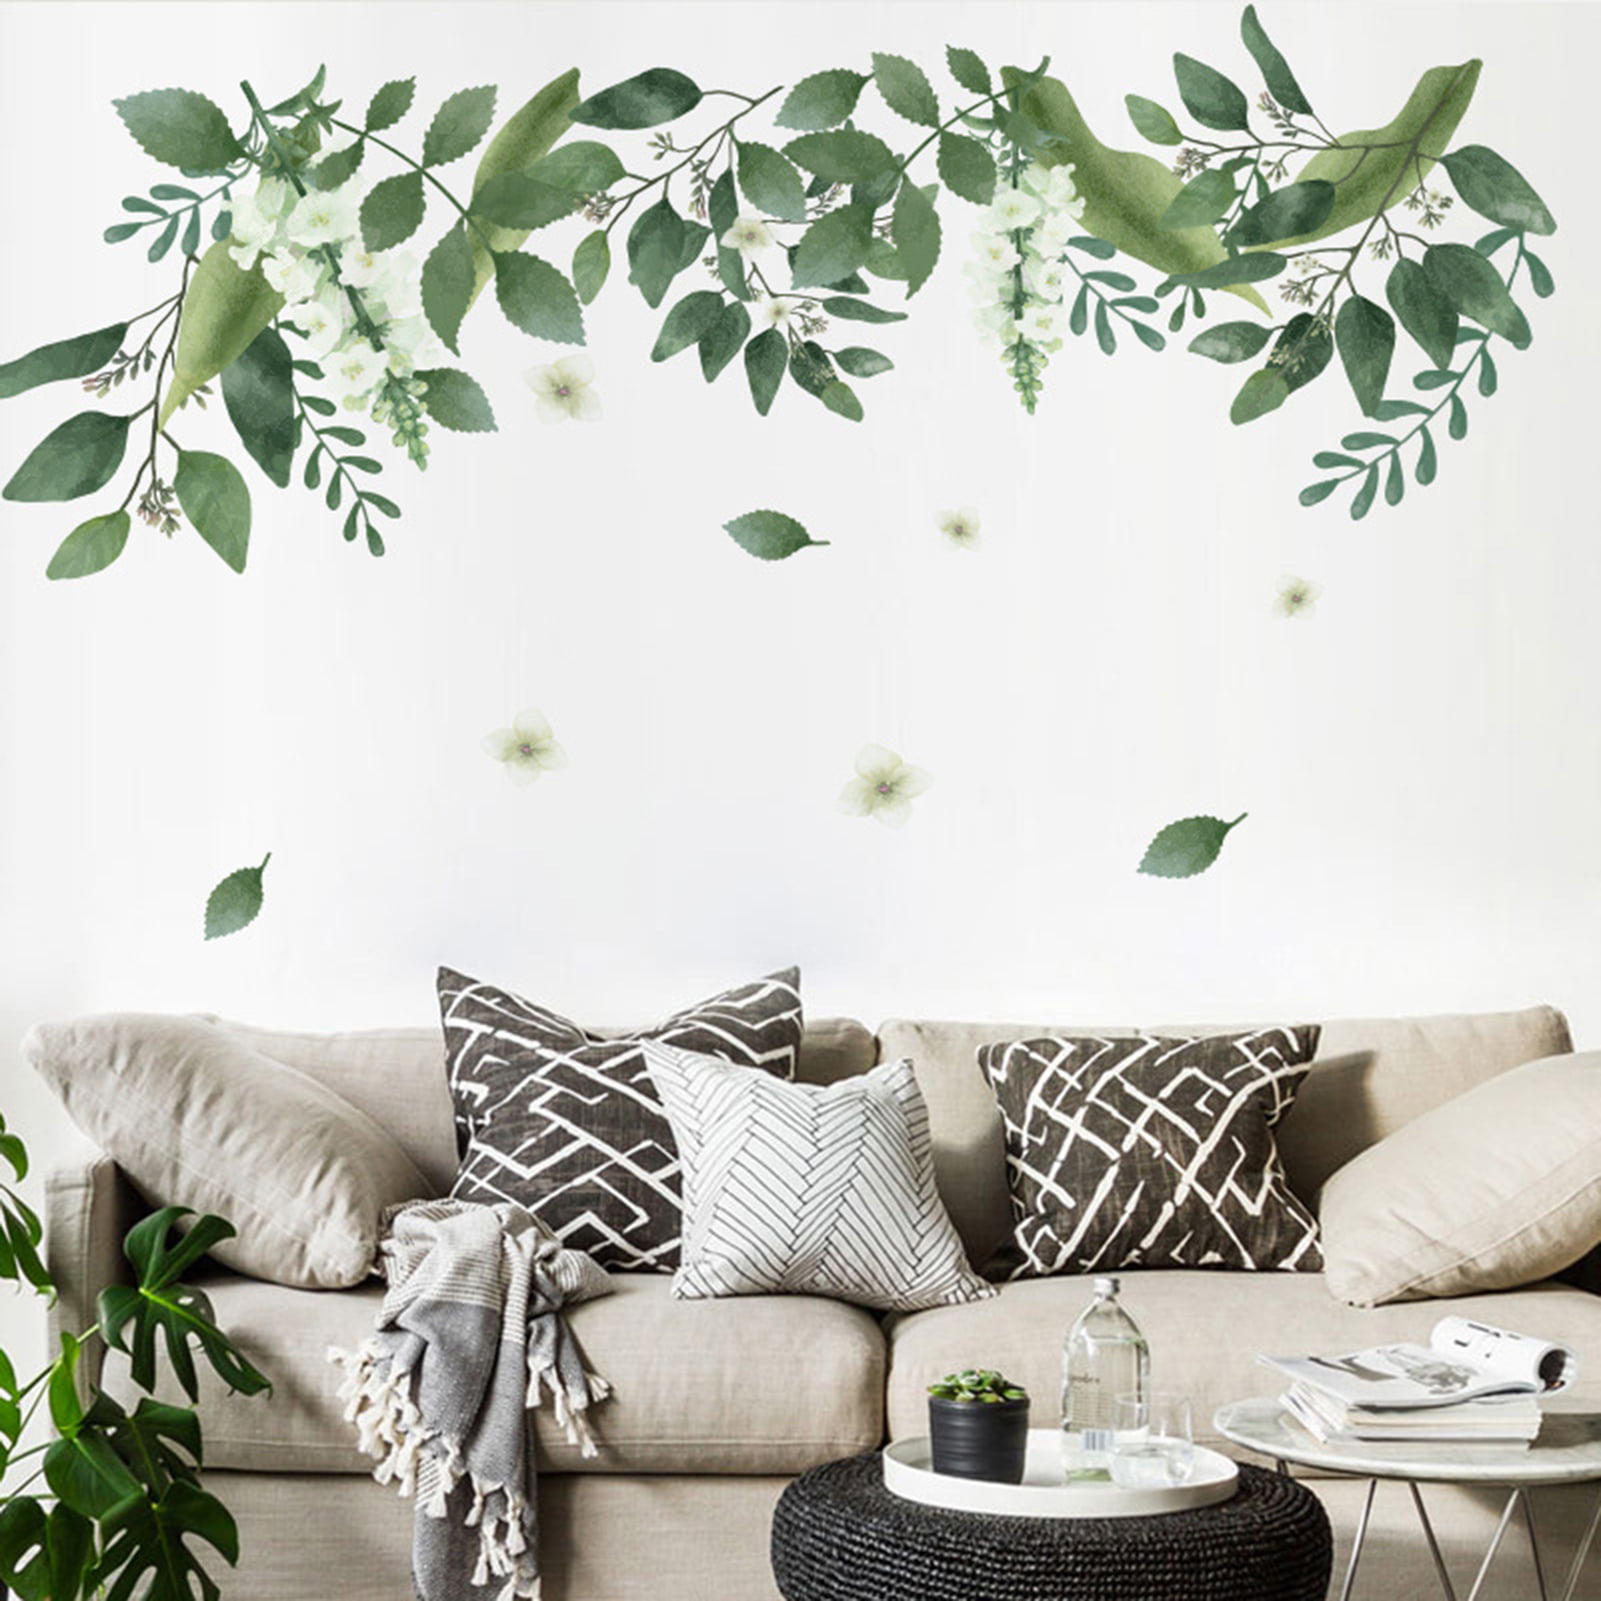 DIY Leaf Wall Stickers Sofa Plant Decals Wall Room Decal house Decoration Decor 